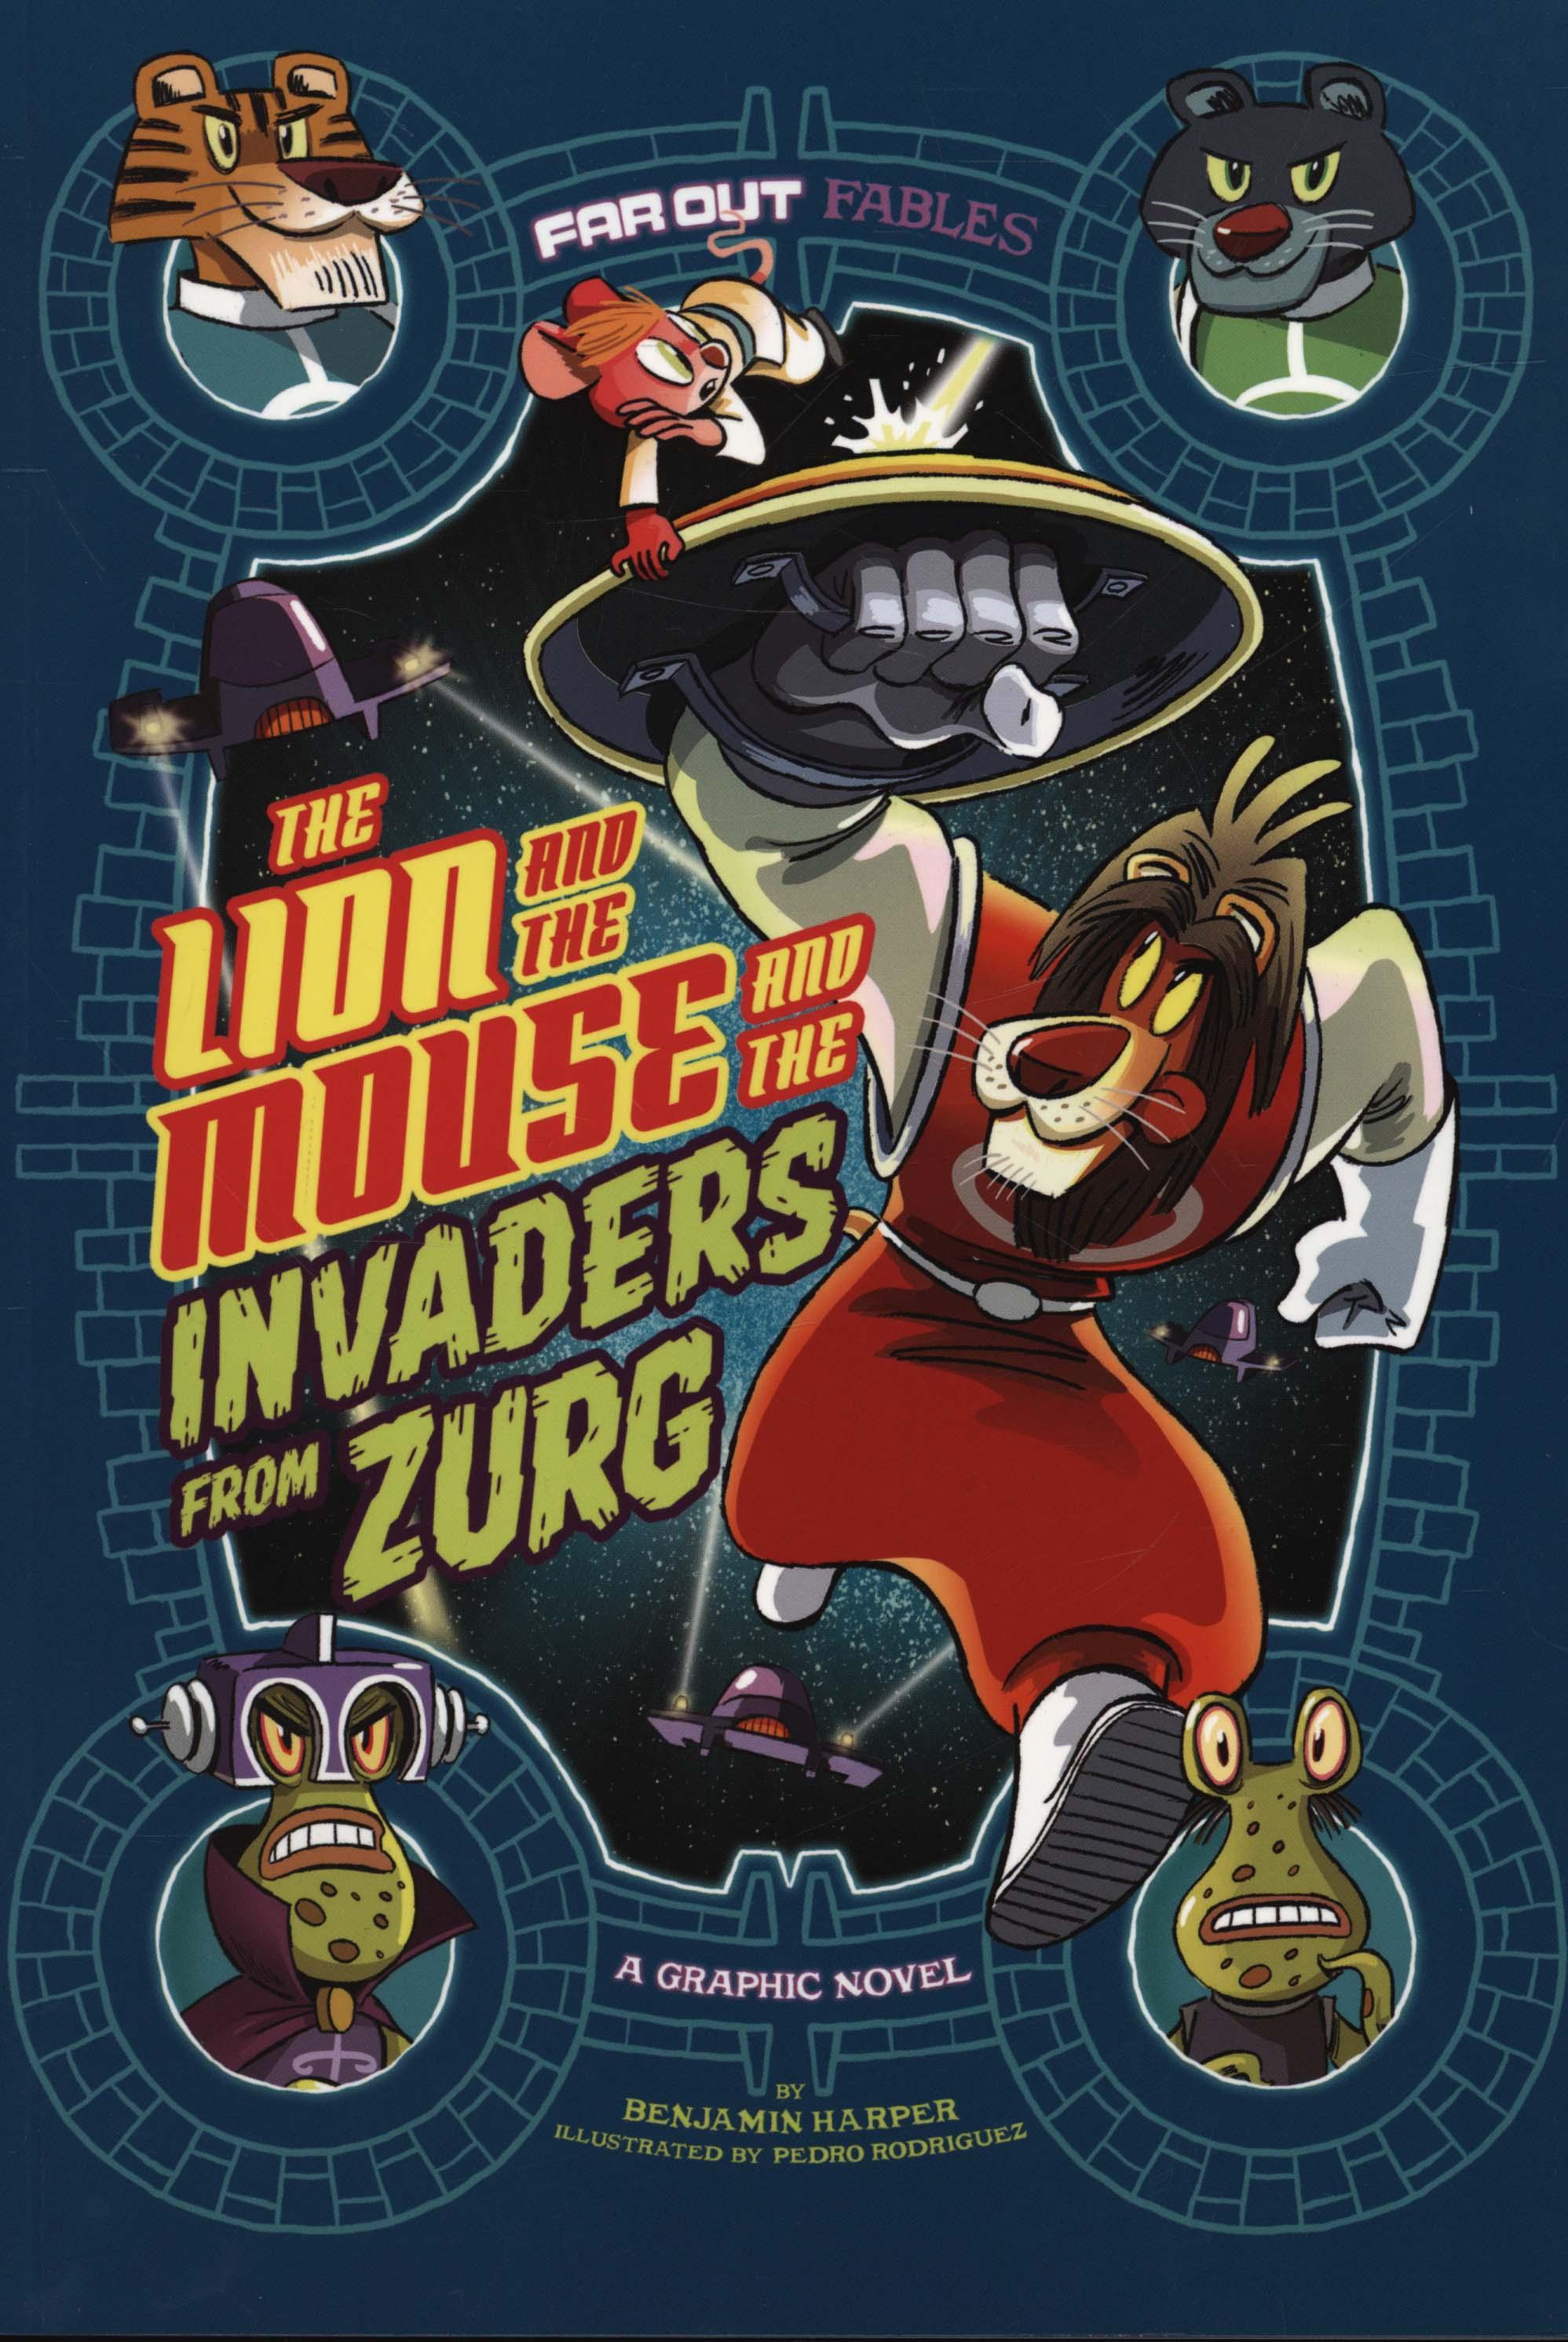 Lion and the Mouse and the Invaders from Zurg - Benjamin Harper